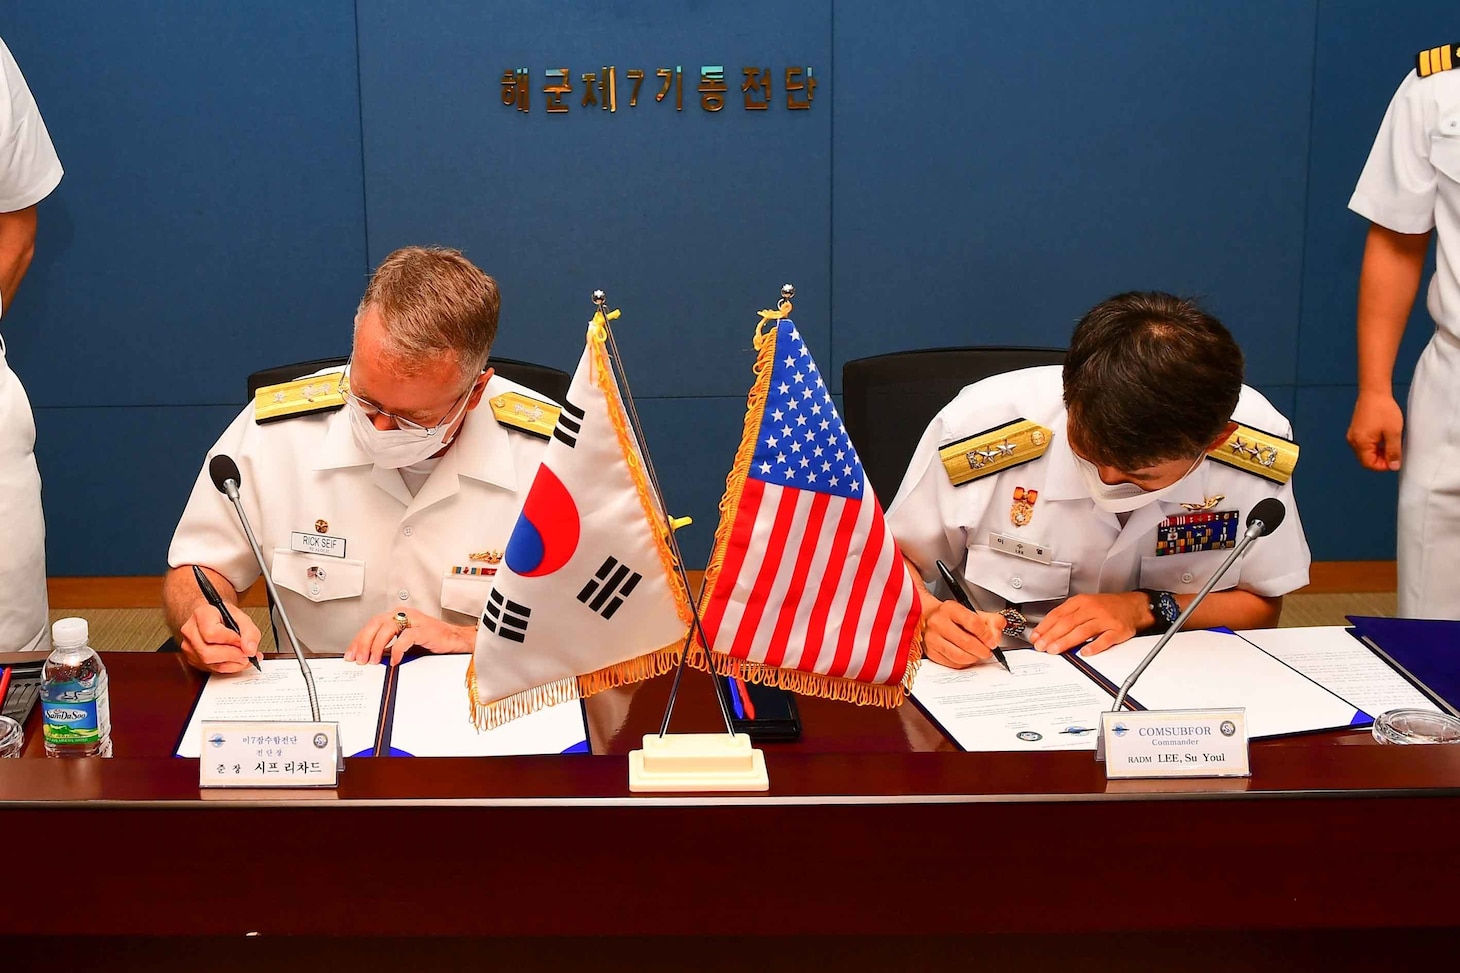 JEJU, Republic of Korea (June 22, 2022) Rear Adm. Rick Seif, Commander, Submarine Group 7, left, signs a memorandum with Rear Adm. Lee Su Youl, Commander, Republic of Korea (ROK) Navy Submarine Force, at the conclusion of the 54th semiannual Submarine Warfare Committee Meeting (SWCM) in Jeju, South Korea, June 22, 2022. Over the past 28 years, SWCM has brought together leaders of both the U.S. and ROK submarine forces to discuss combined submarine training and force integration. (Photo courtesy of ROK Public Affairs)